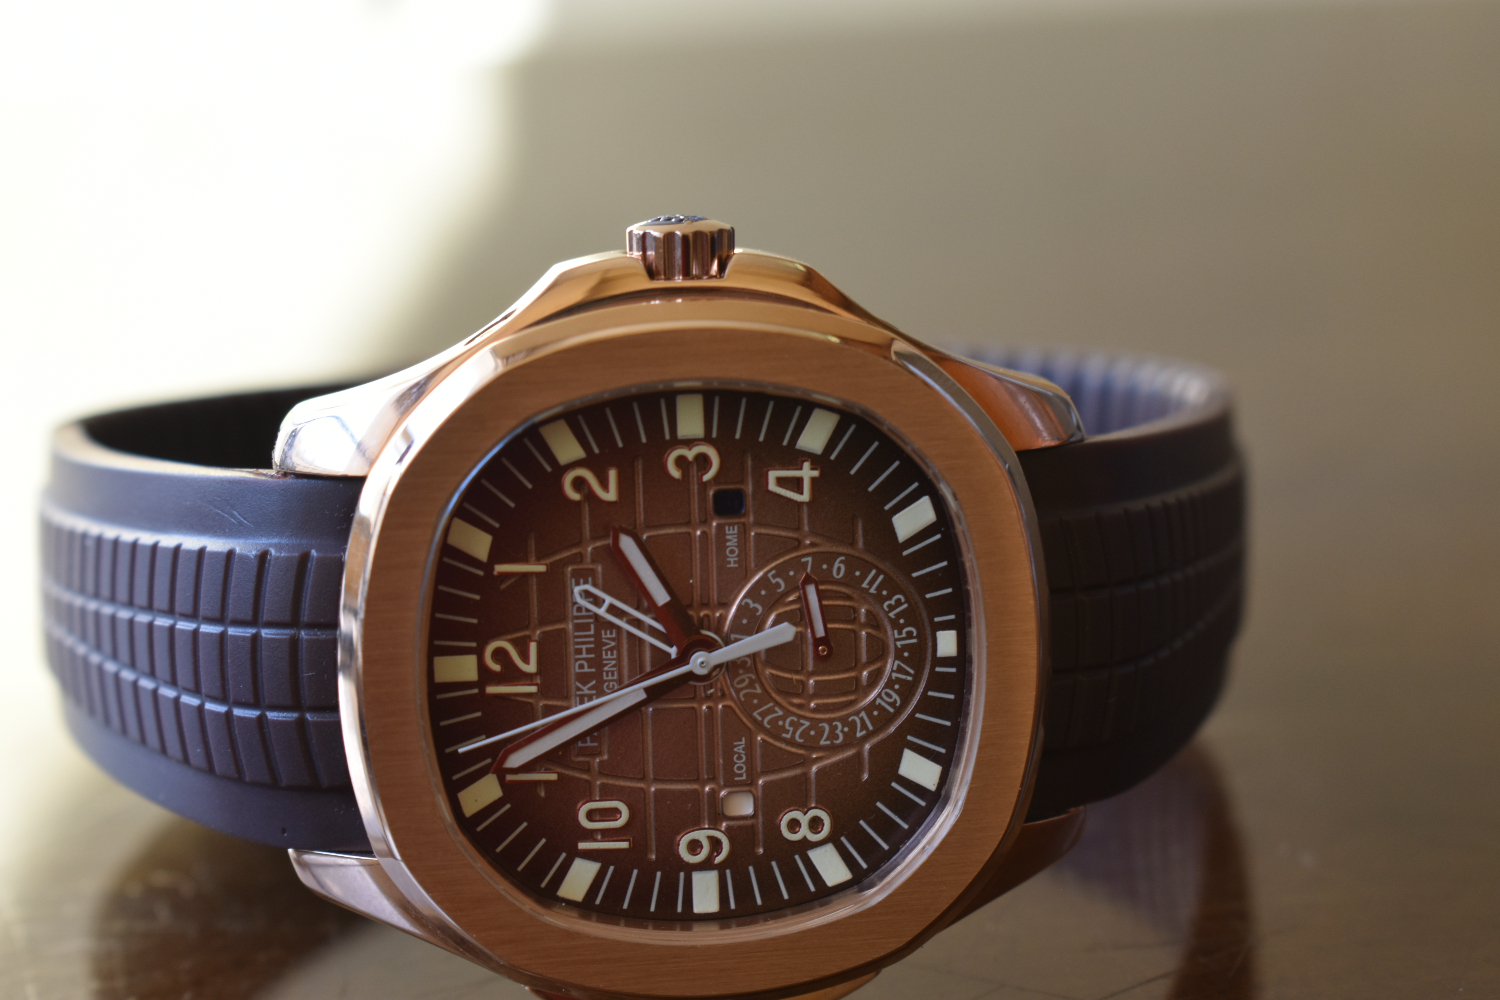 Patek Philippe Aquanaut Travel Time 5164 R-001 Rose Gold Brown Rubber Straps Watch for sale in Nairobi,Kenya.